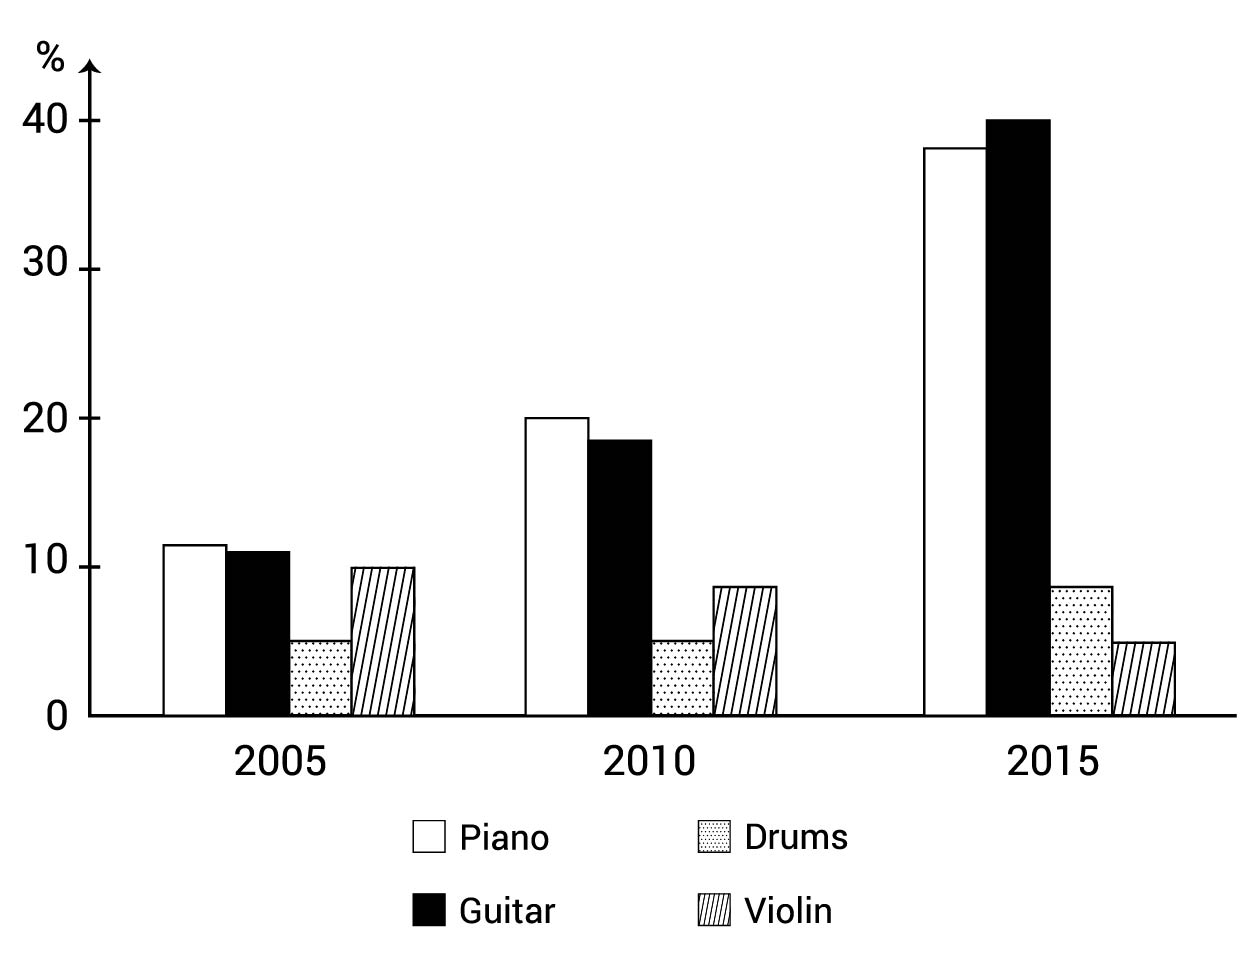 The bar chart showed the percentage of school children learning to play four different musical instruments